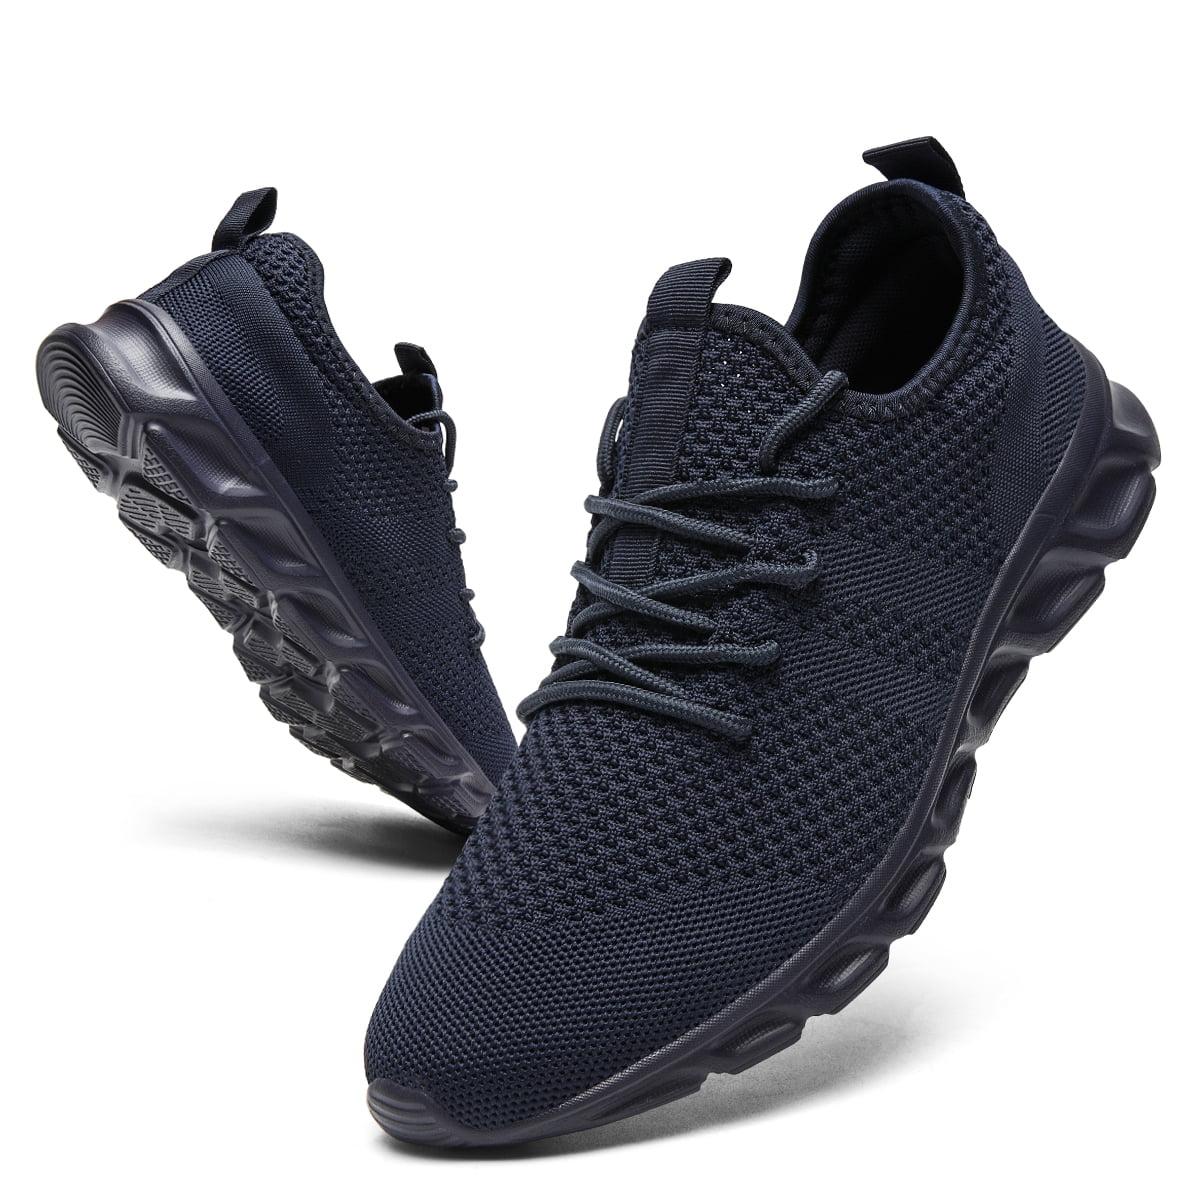 Men's Casual Sneakers Sports Fashion Running Breathable Outdoor Jogging Shoes 